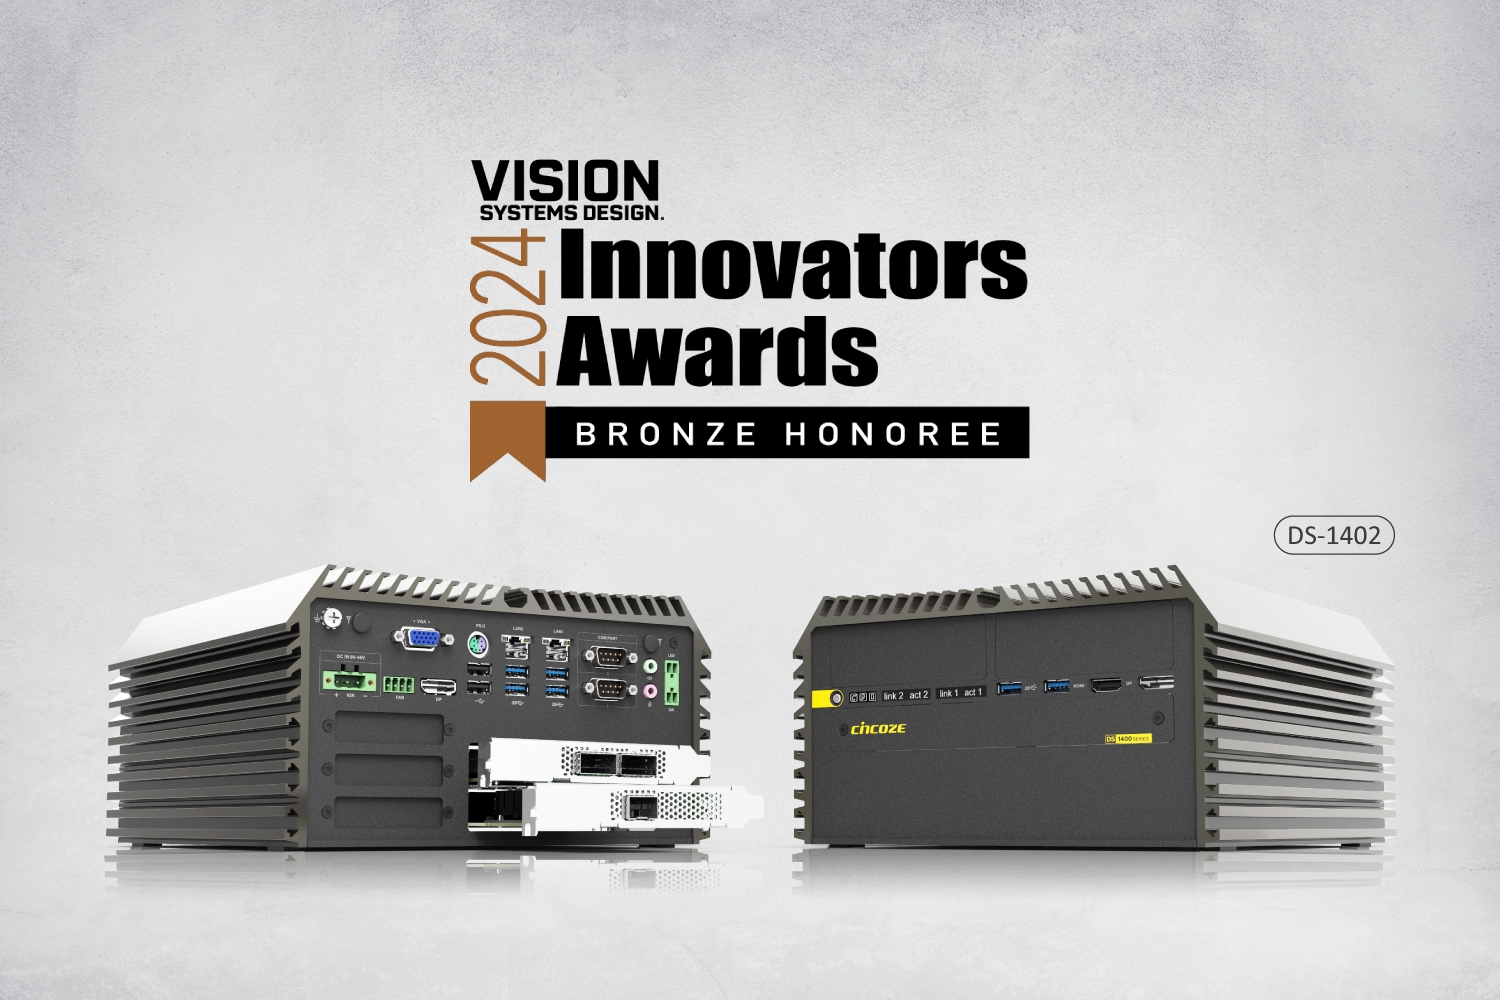 Cincoze Wins the 2024 Vision Systems Design Innovators Award for its High-Performance Rugged Computer (DS-1402) !